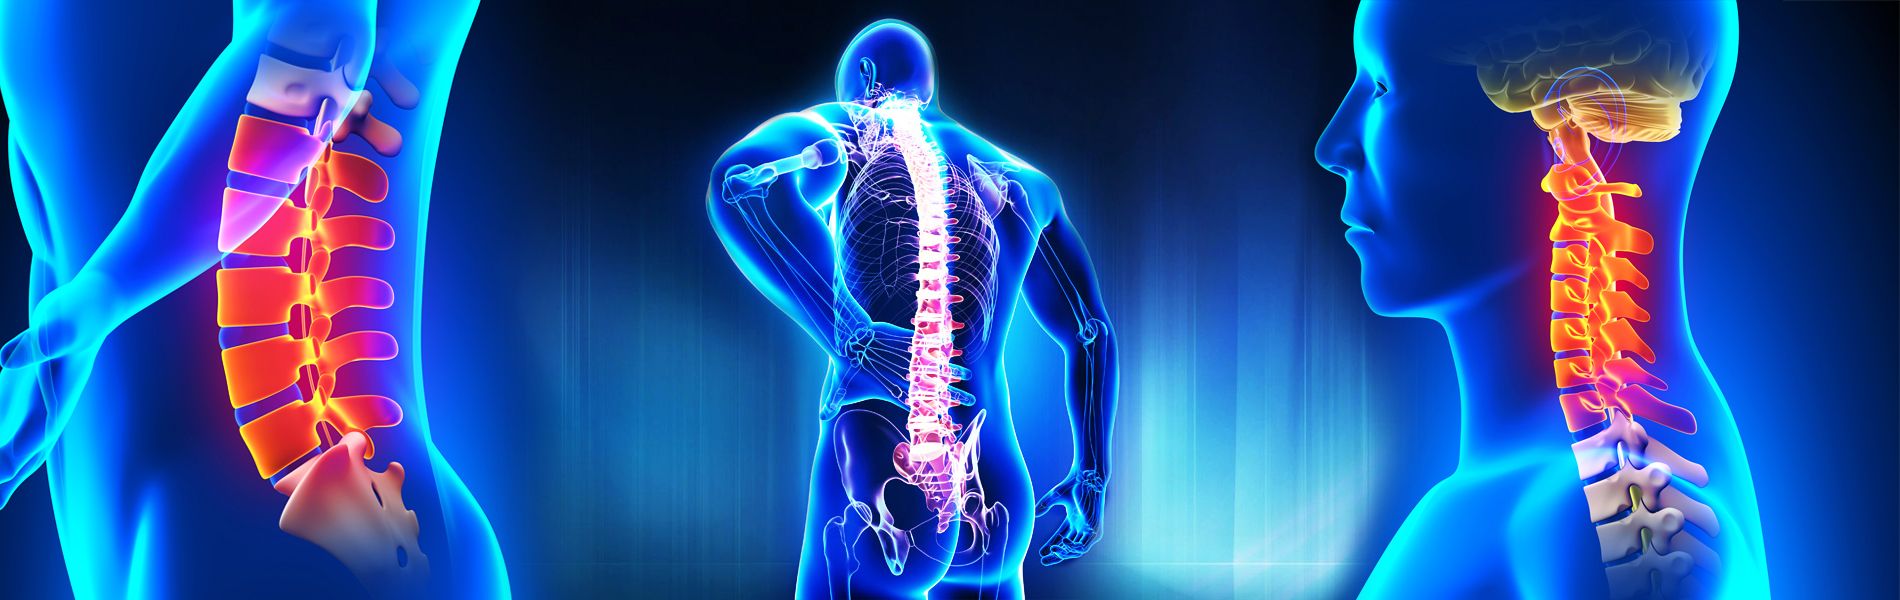 We are North Colorado Spine and Orthopedics Center which provides its patients the top class treatments for R. Spine surgery, Orthopedics, Spinal stenosis surgery